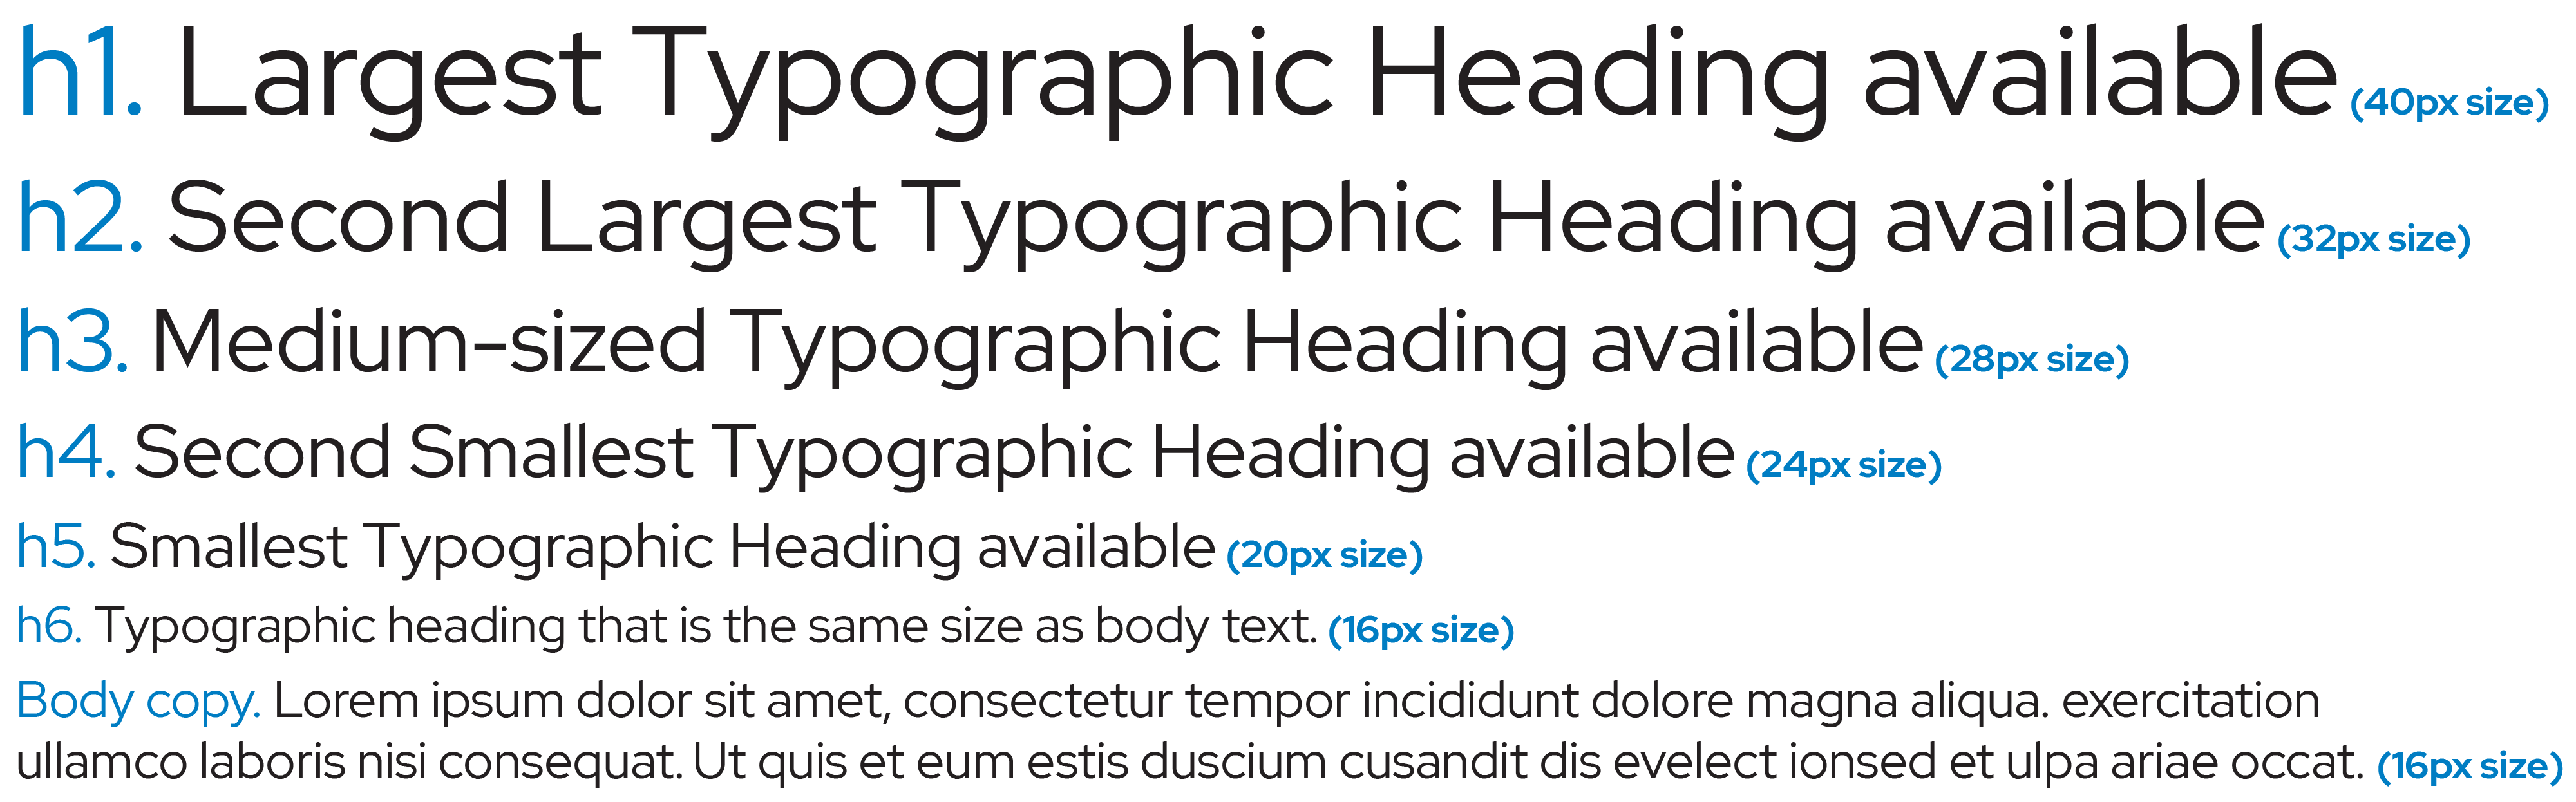 Red Hat font in different sizes to show how to distinguish between headers and paragraphs.